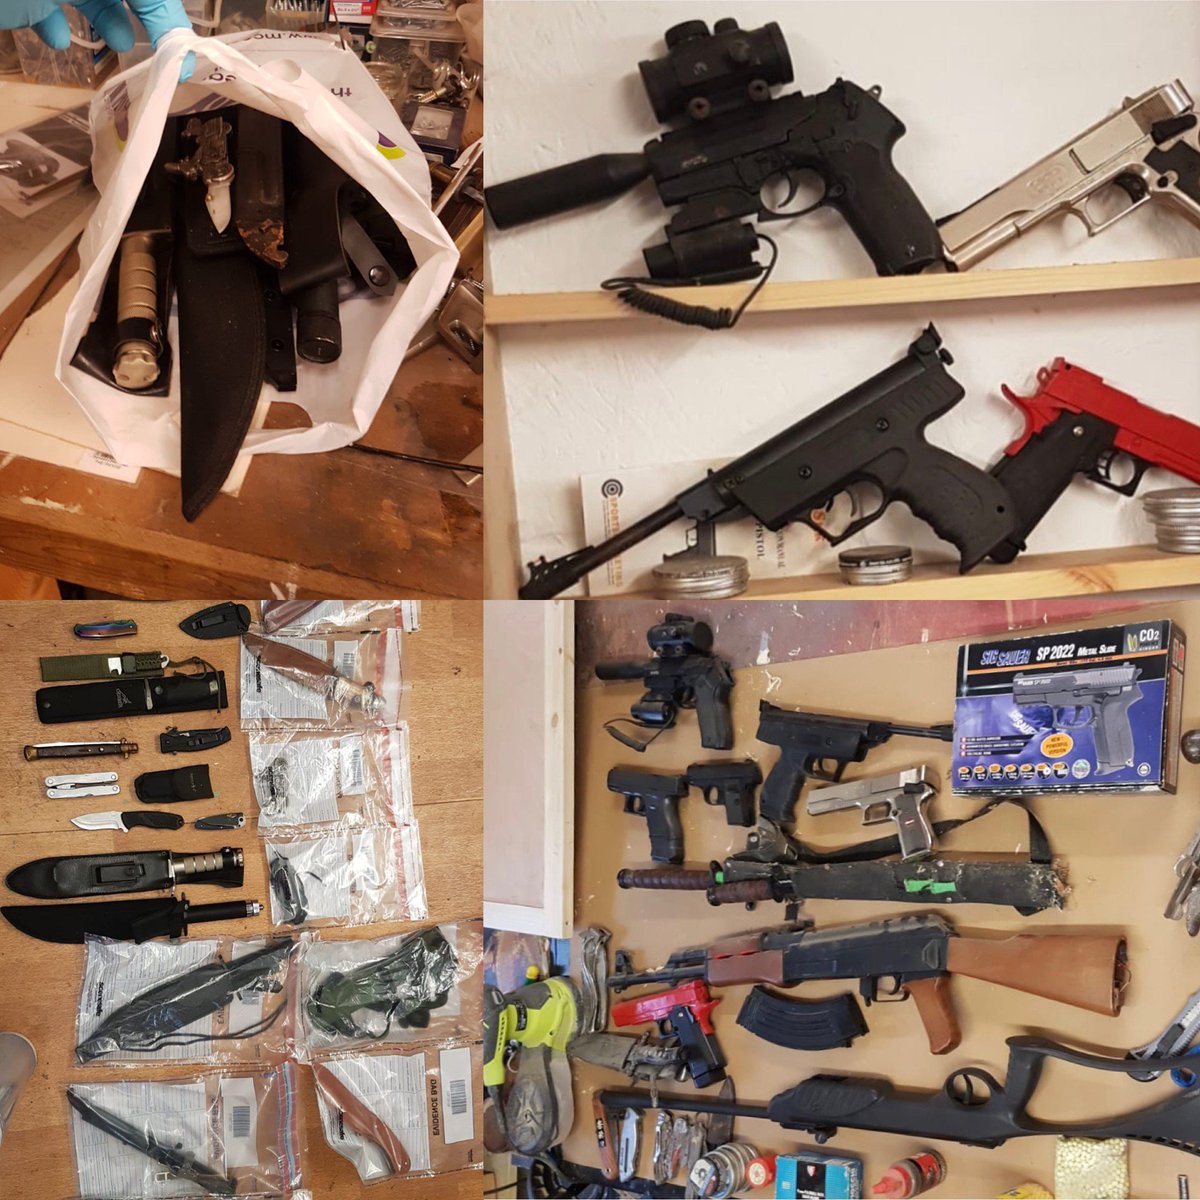 This is why we come to work...

Arsenal of 70 weapons seized following a domestic today. One arrested on suspicion of Threats to kill, Possession Class A Drugs, Possession of Firearms with Intent to Cause Fear of Violence #ProudToServe #SafeguardingTheVulnerable #HiddenHarm #ICR2